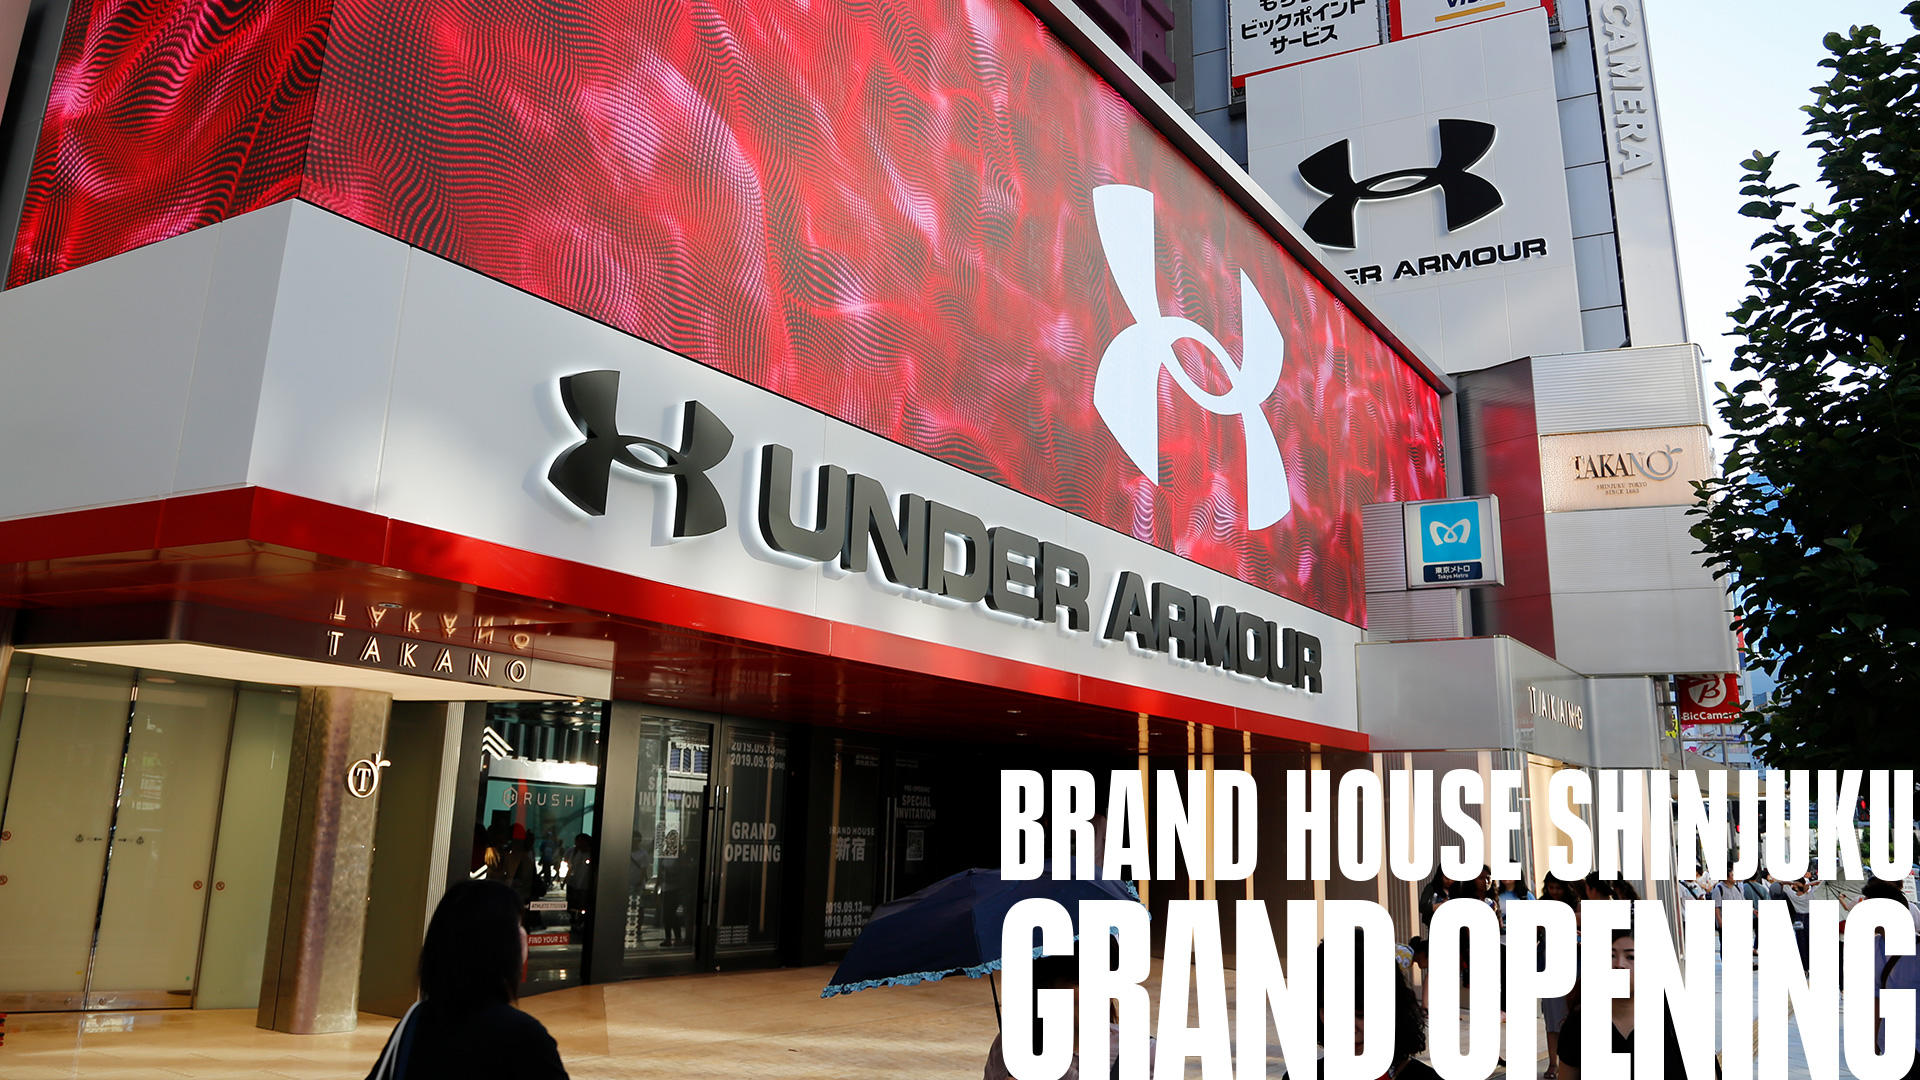 19 9 13 Grand Opening Under Armour Brand House 新宿 Shop Blog Under Armour アンダーアーマー